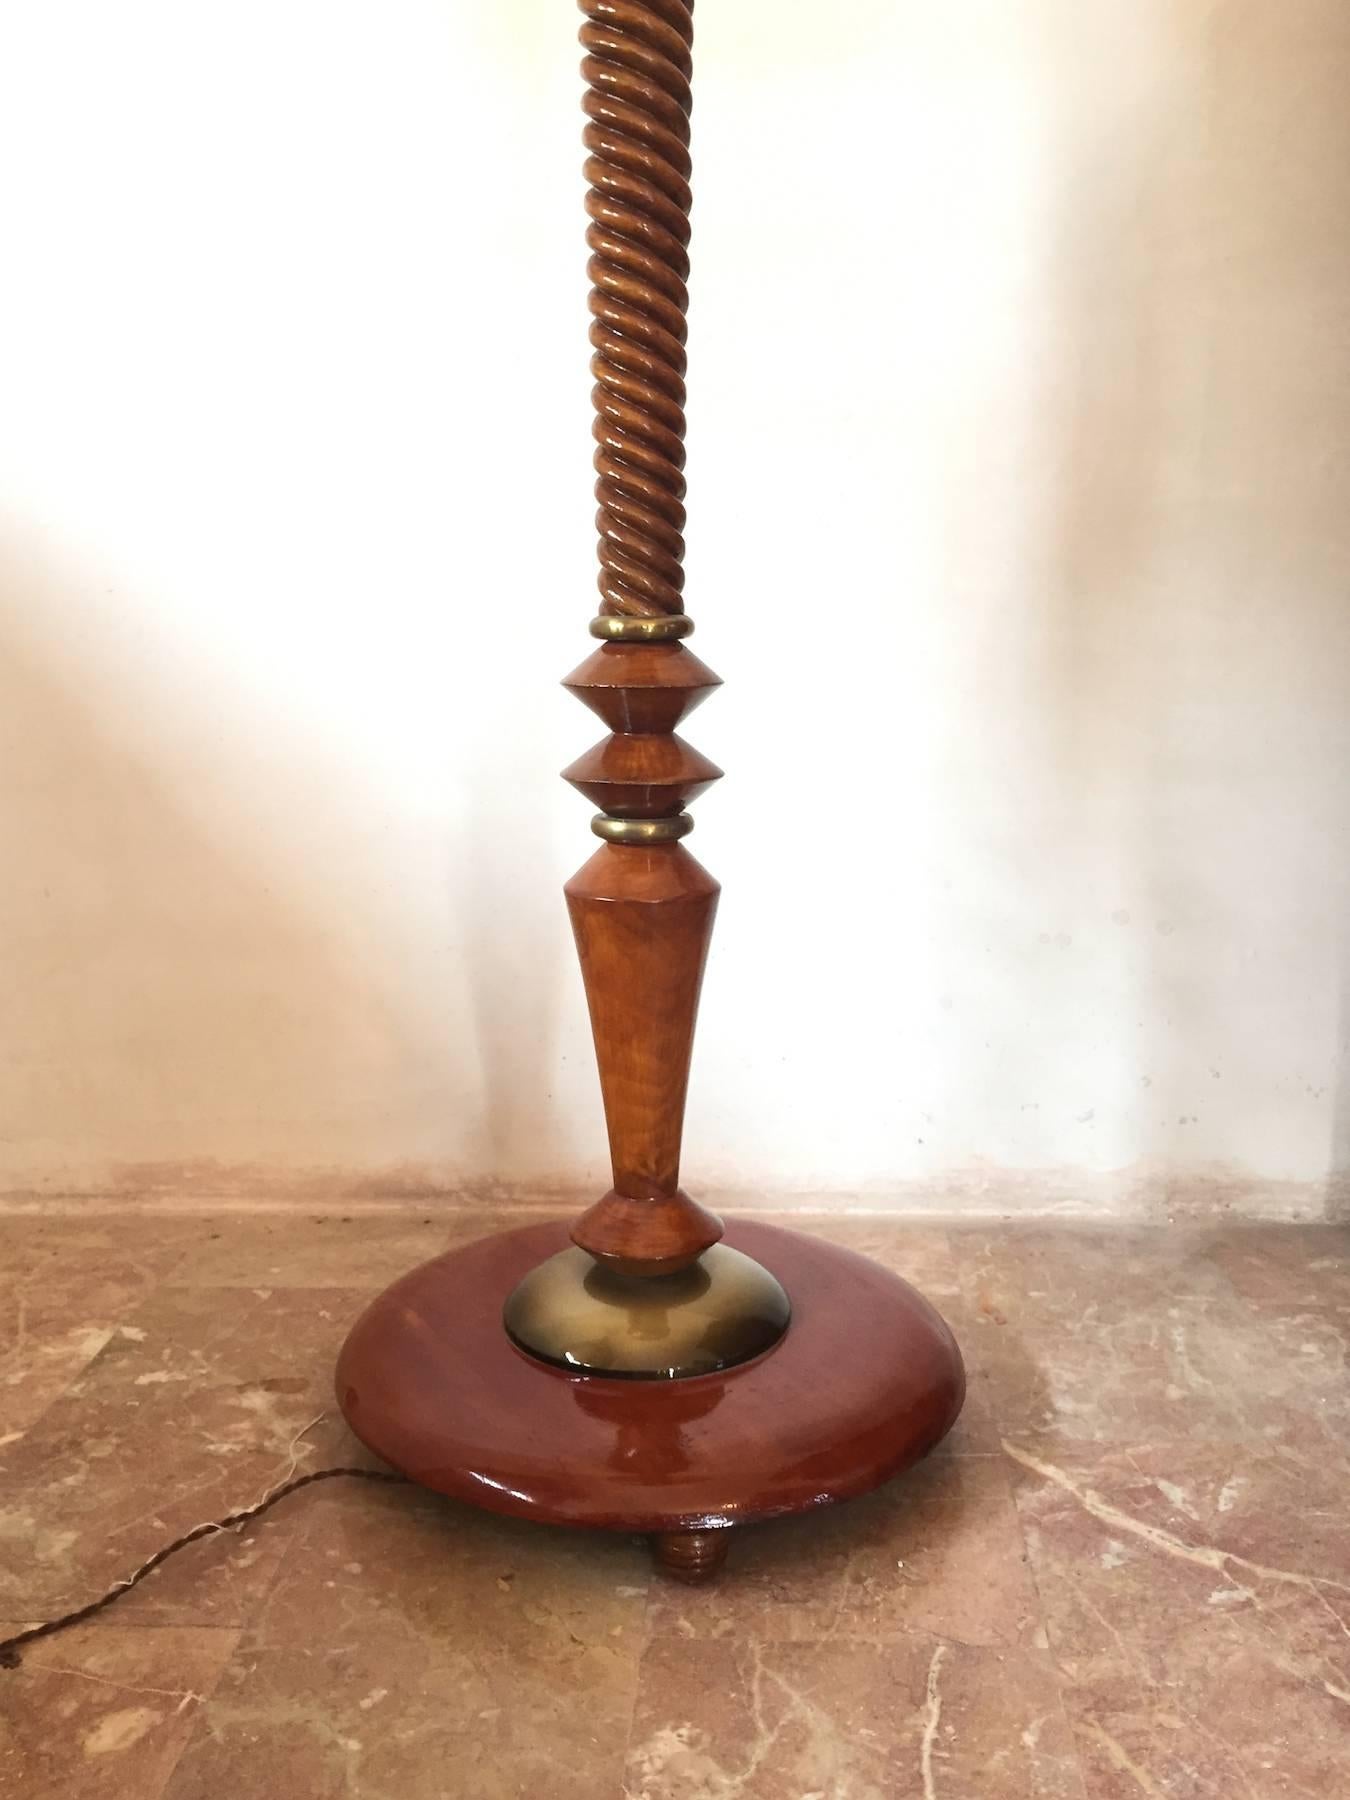 French Art Deco Carved Wood with Brass Decorations Floor Lamp, 1930s For Sale 2